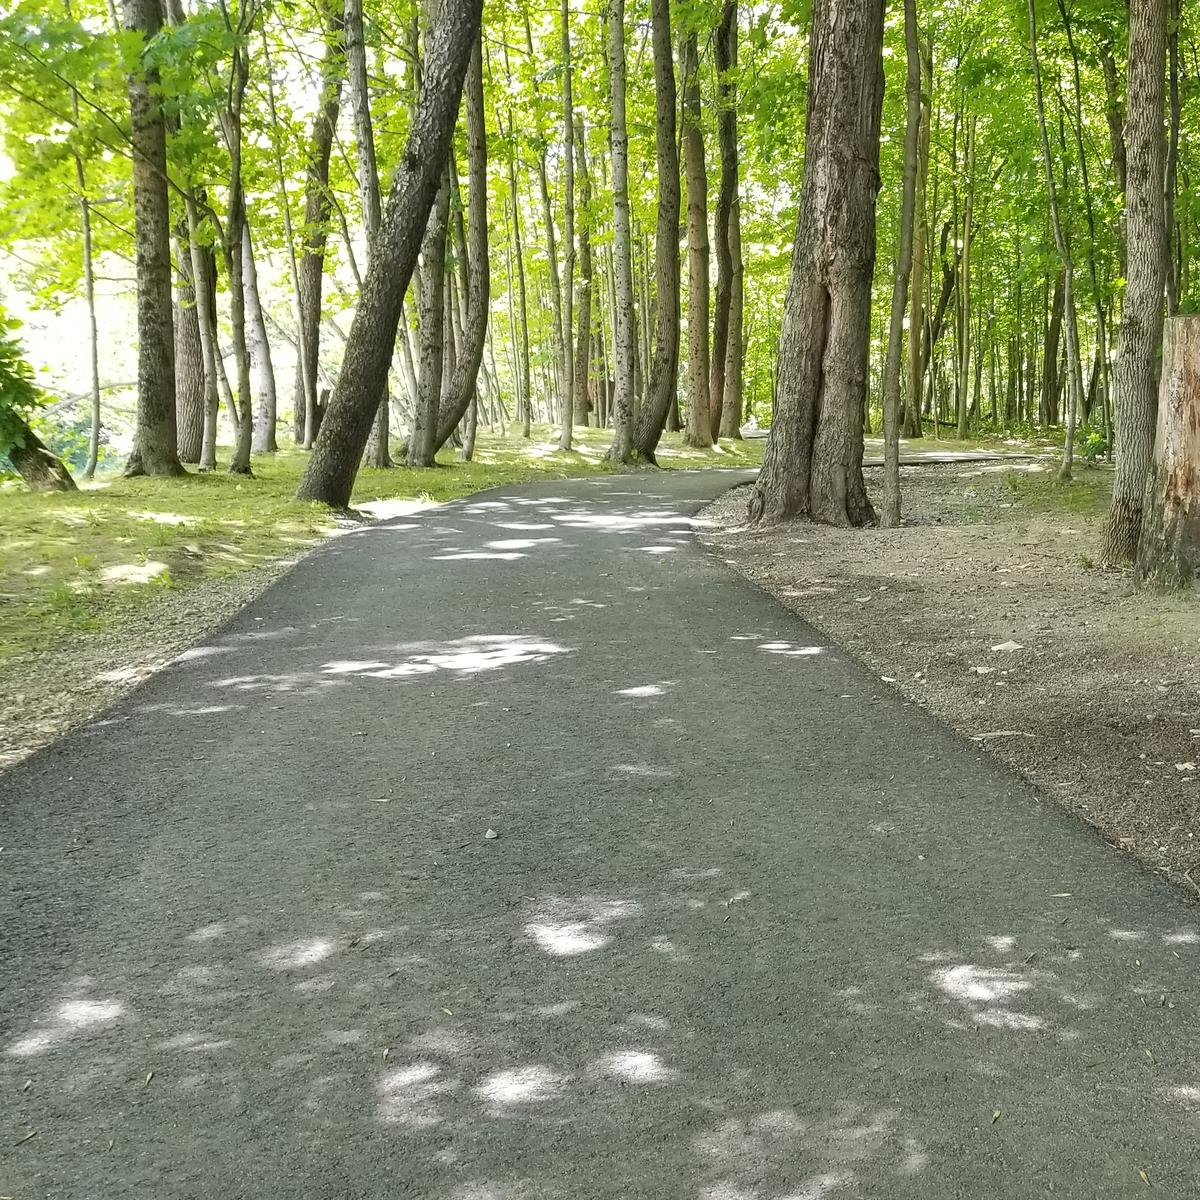 The paved surface of the trail.